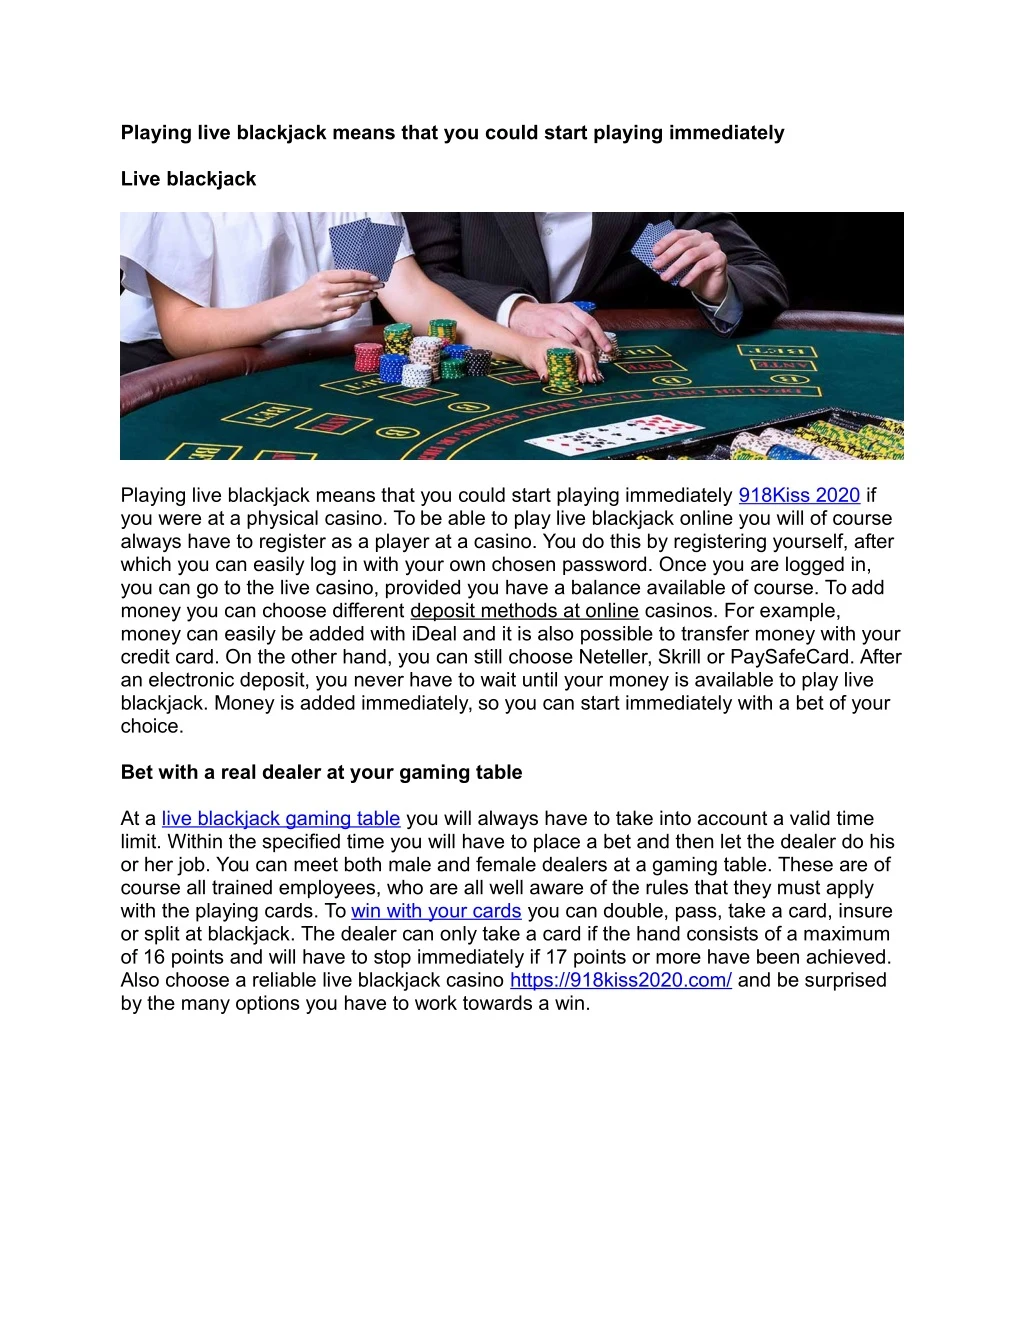 playing live blackjack means that you could start